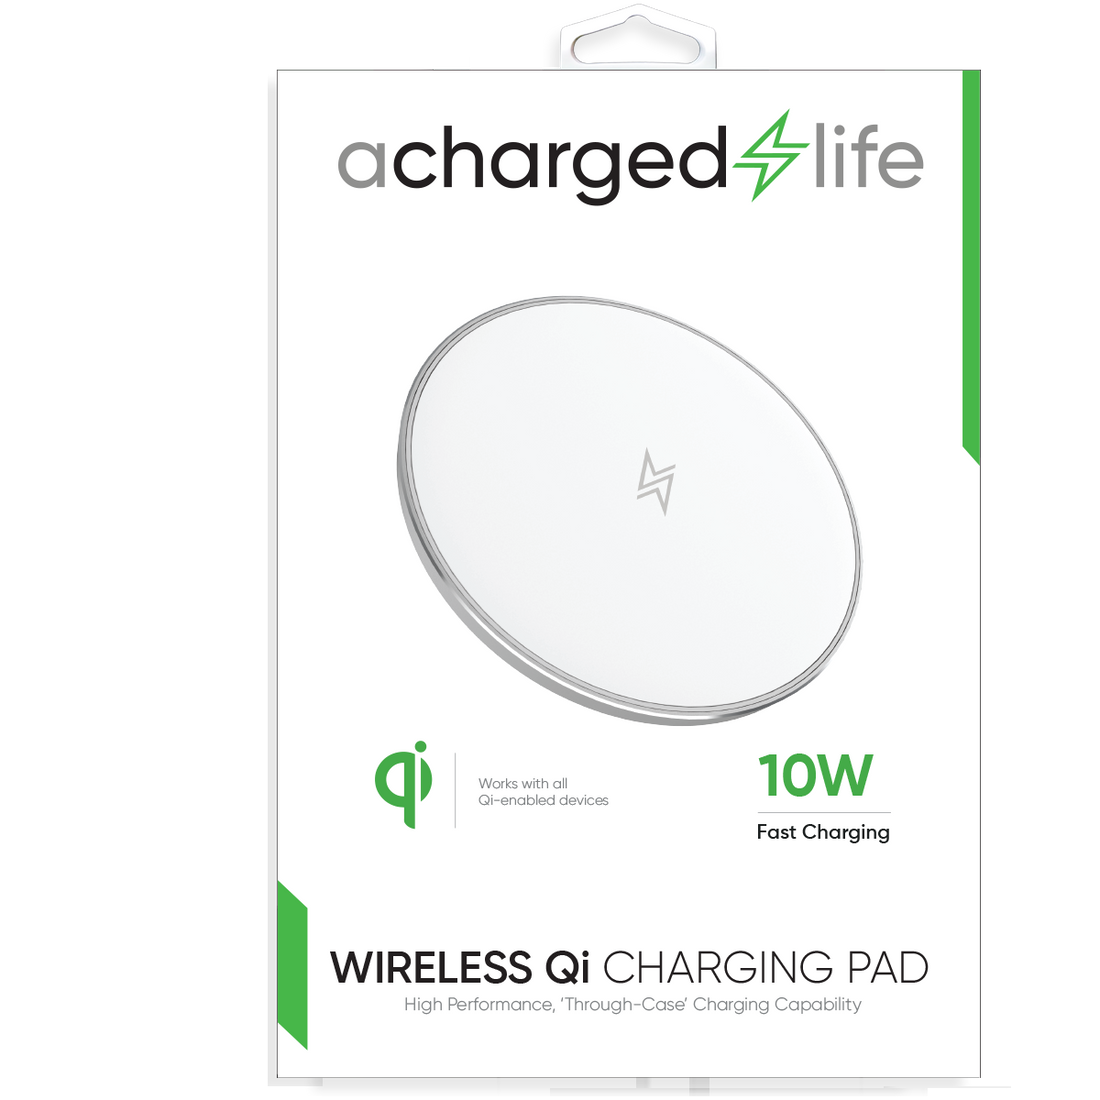 CL207 - Qi Charger 10W Silver/White with Micro-USB Cable